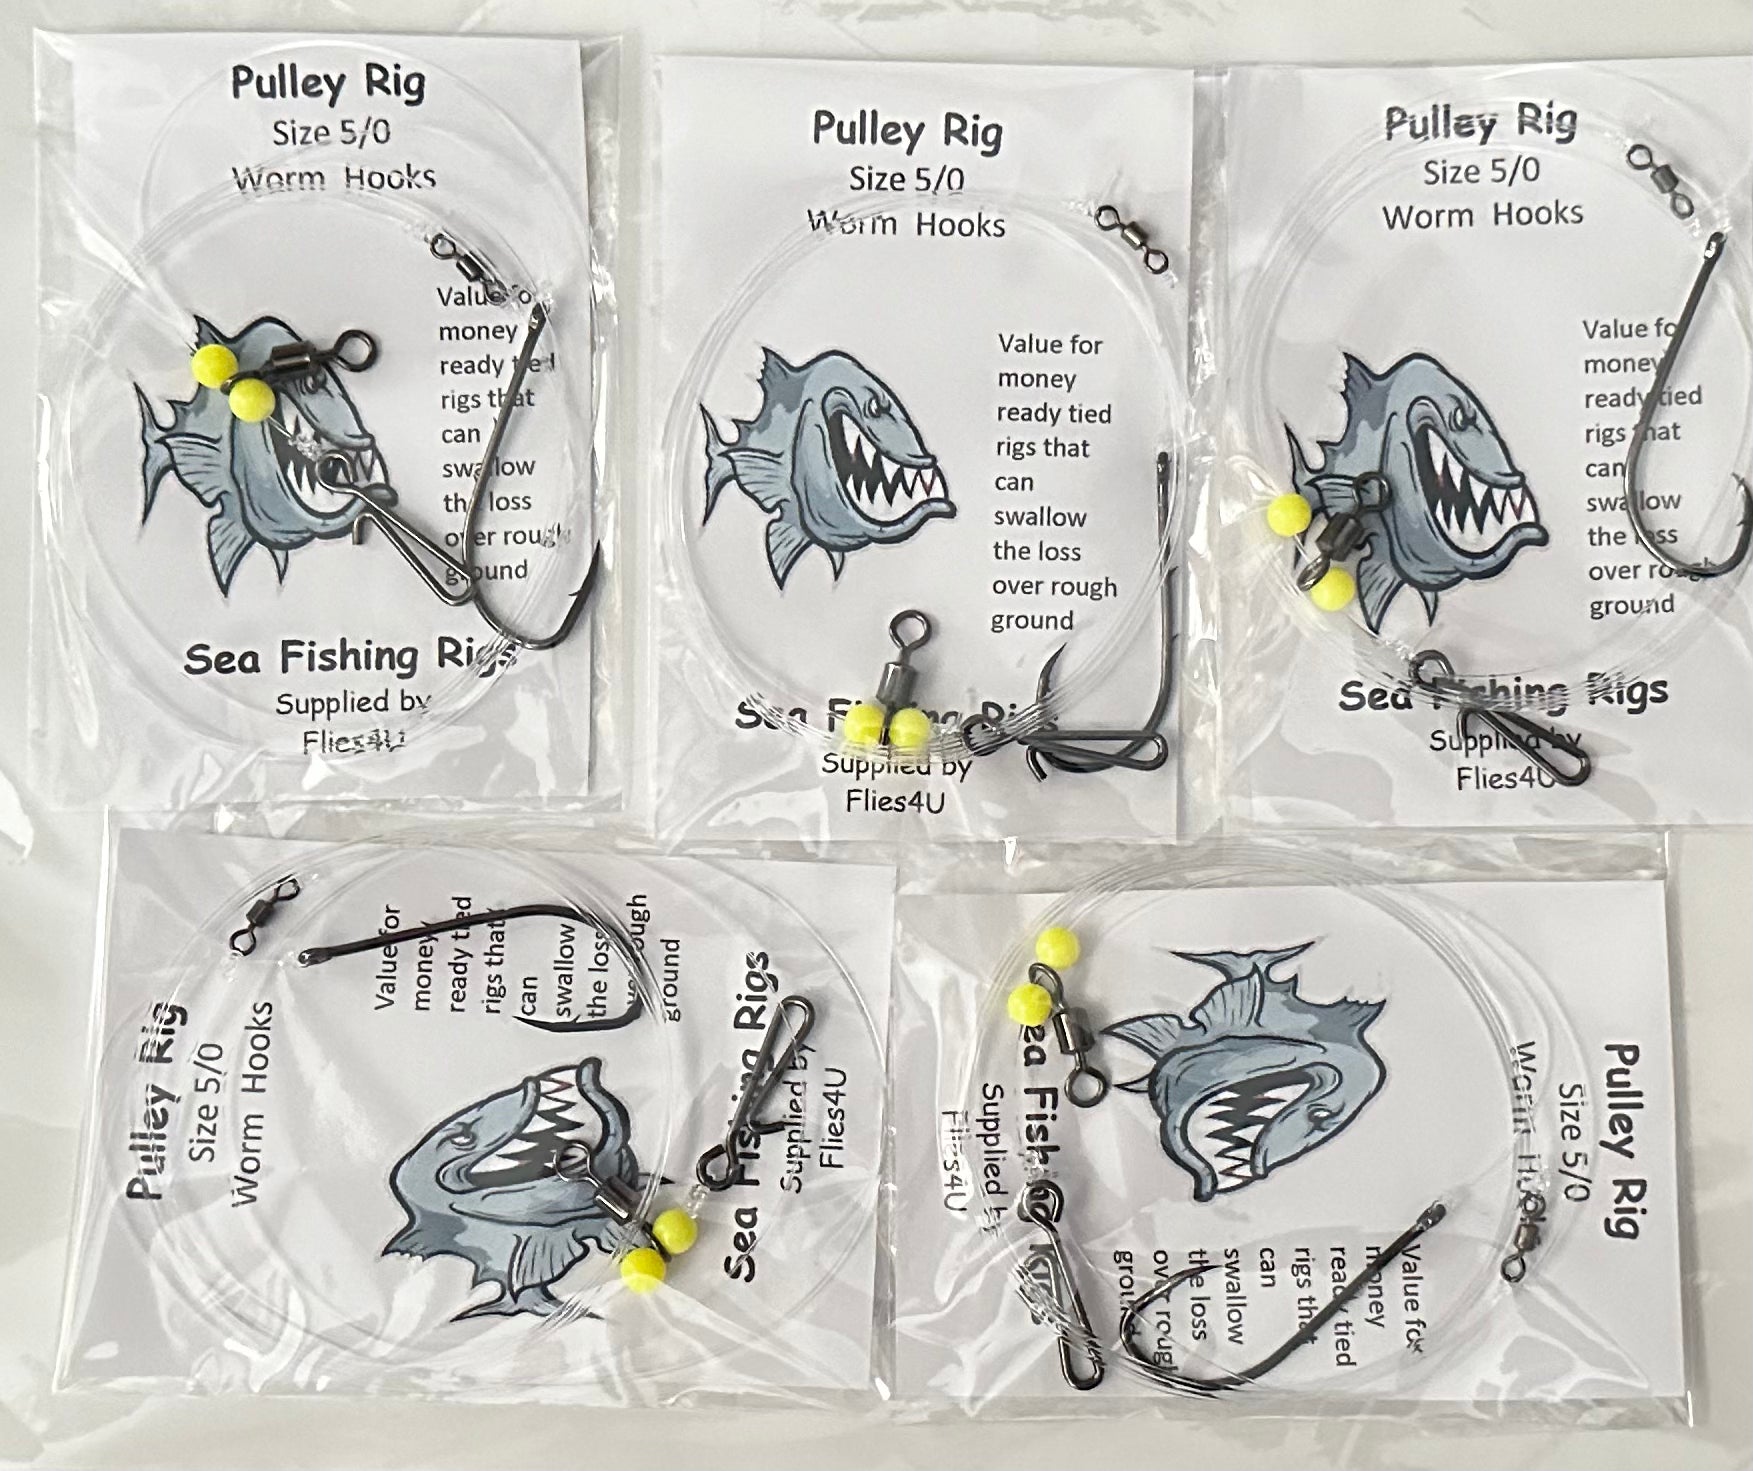 sea fishing pulley 5/0 rigs